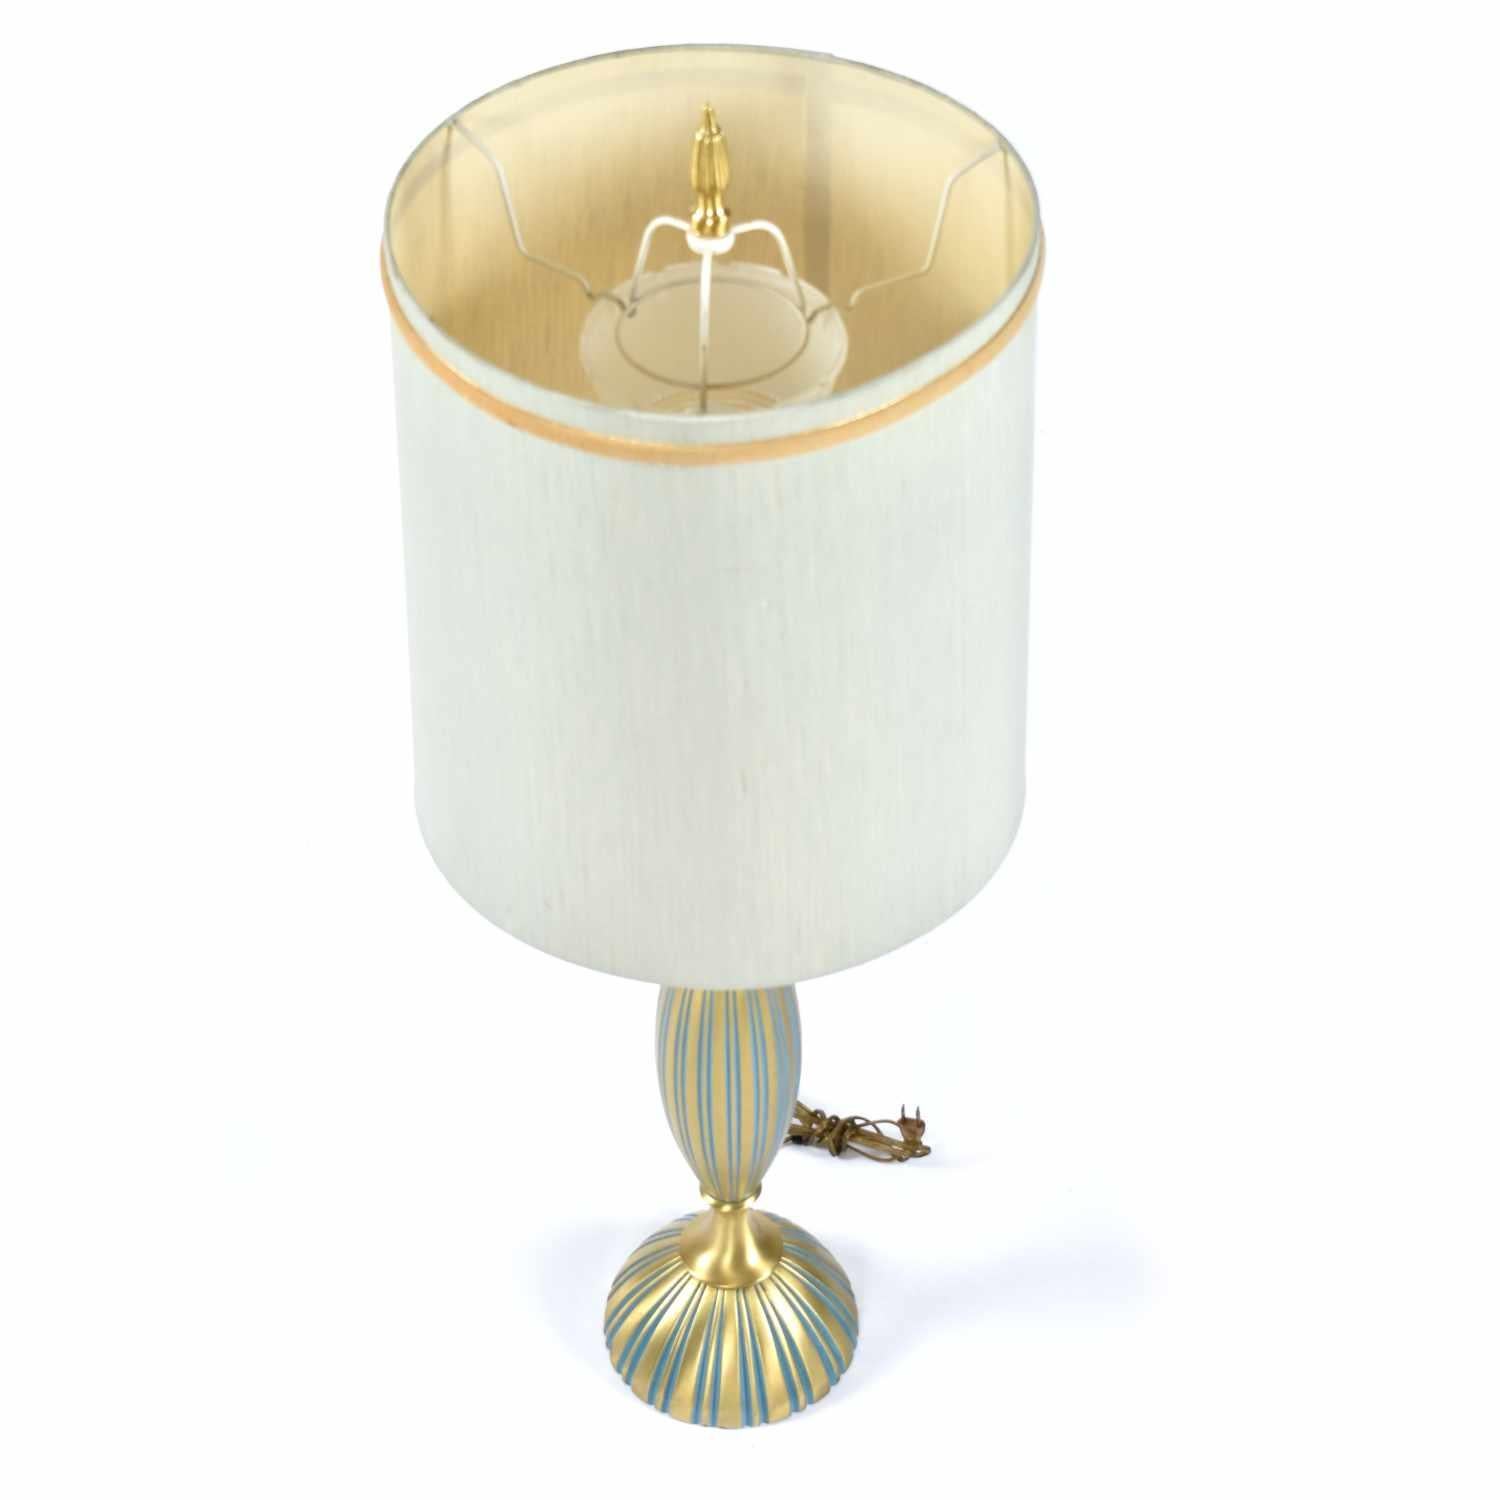 Outstanding Mid-Century Modern Rembrandt table lamp with original shade. This is one of the best condition vintage lamps we’ve come across. It’s quite uncommon to find a metal lamp with so little oxidization after seven decades! The lamp shade is